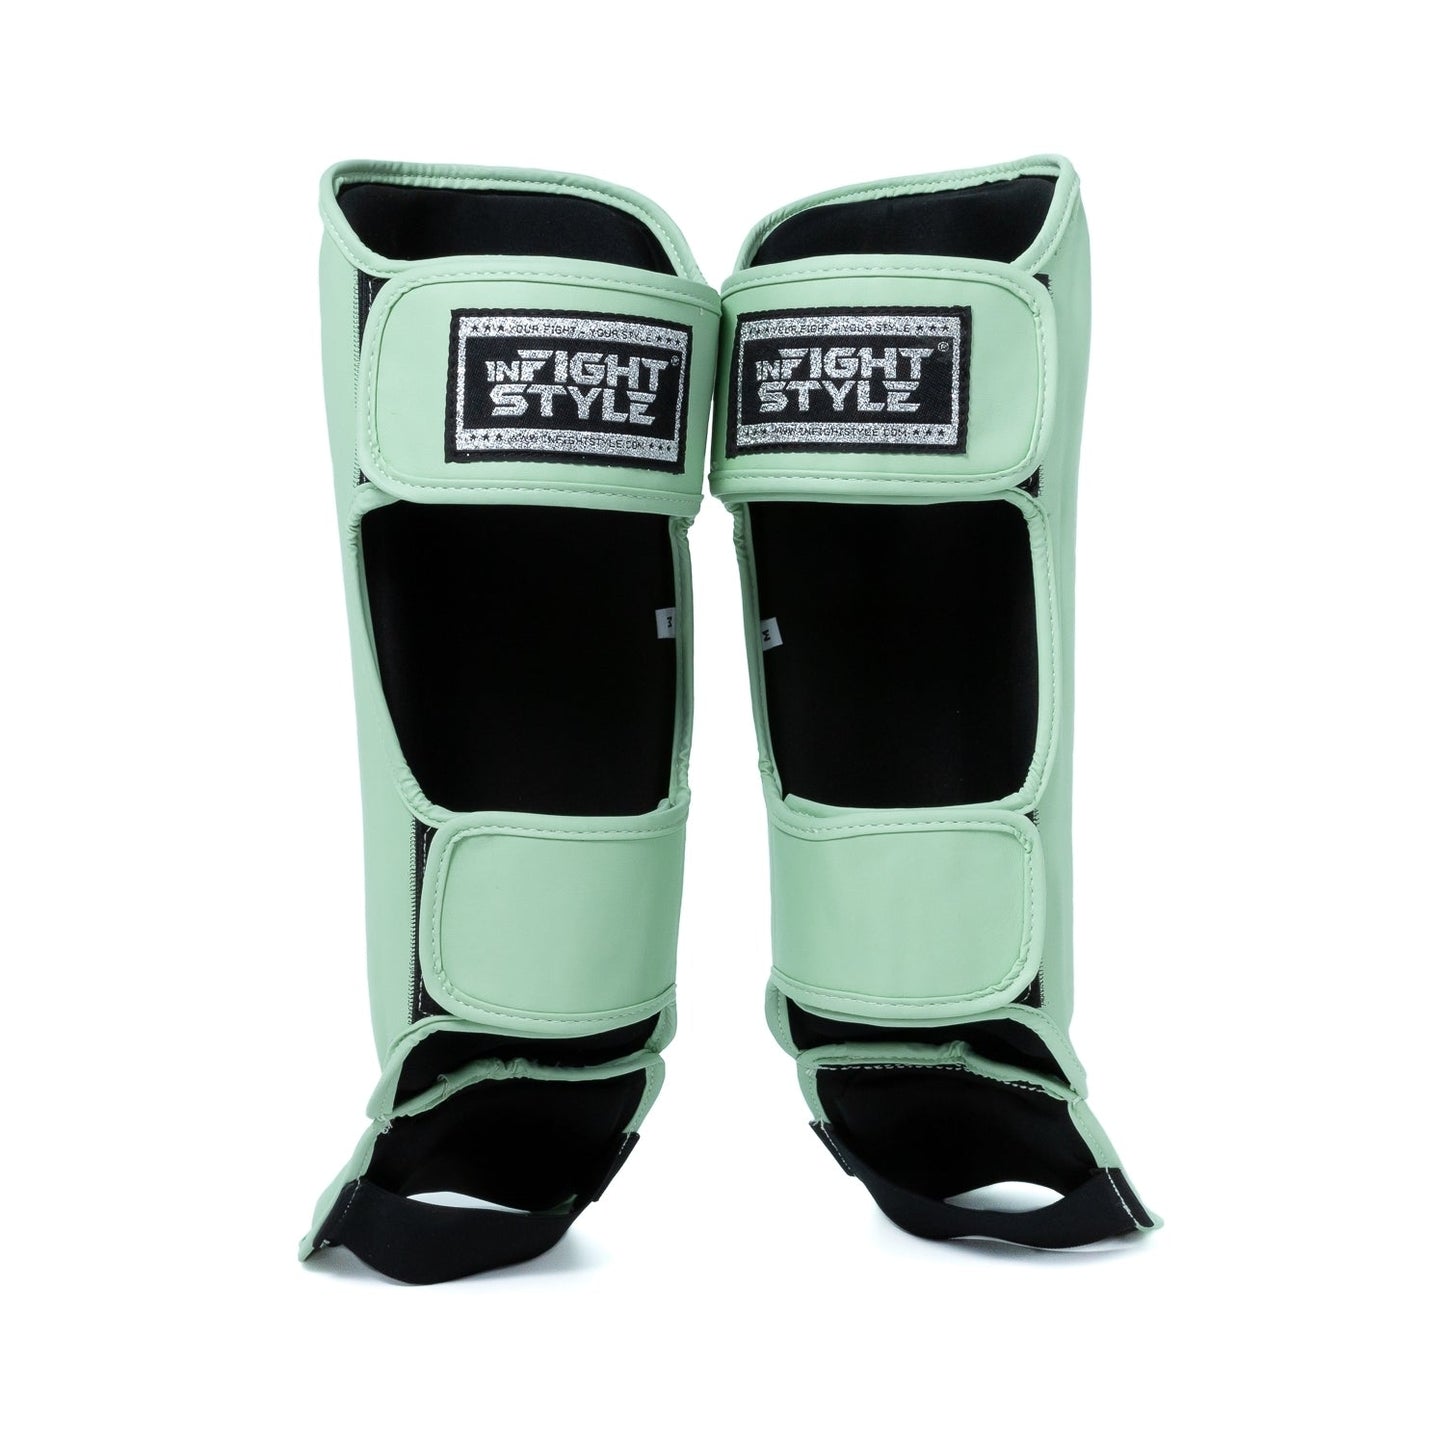 INFIGHTSTYLE PRO SHIN PROTECTION SEMI HOOK-AND-LOOP